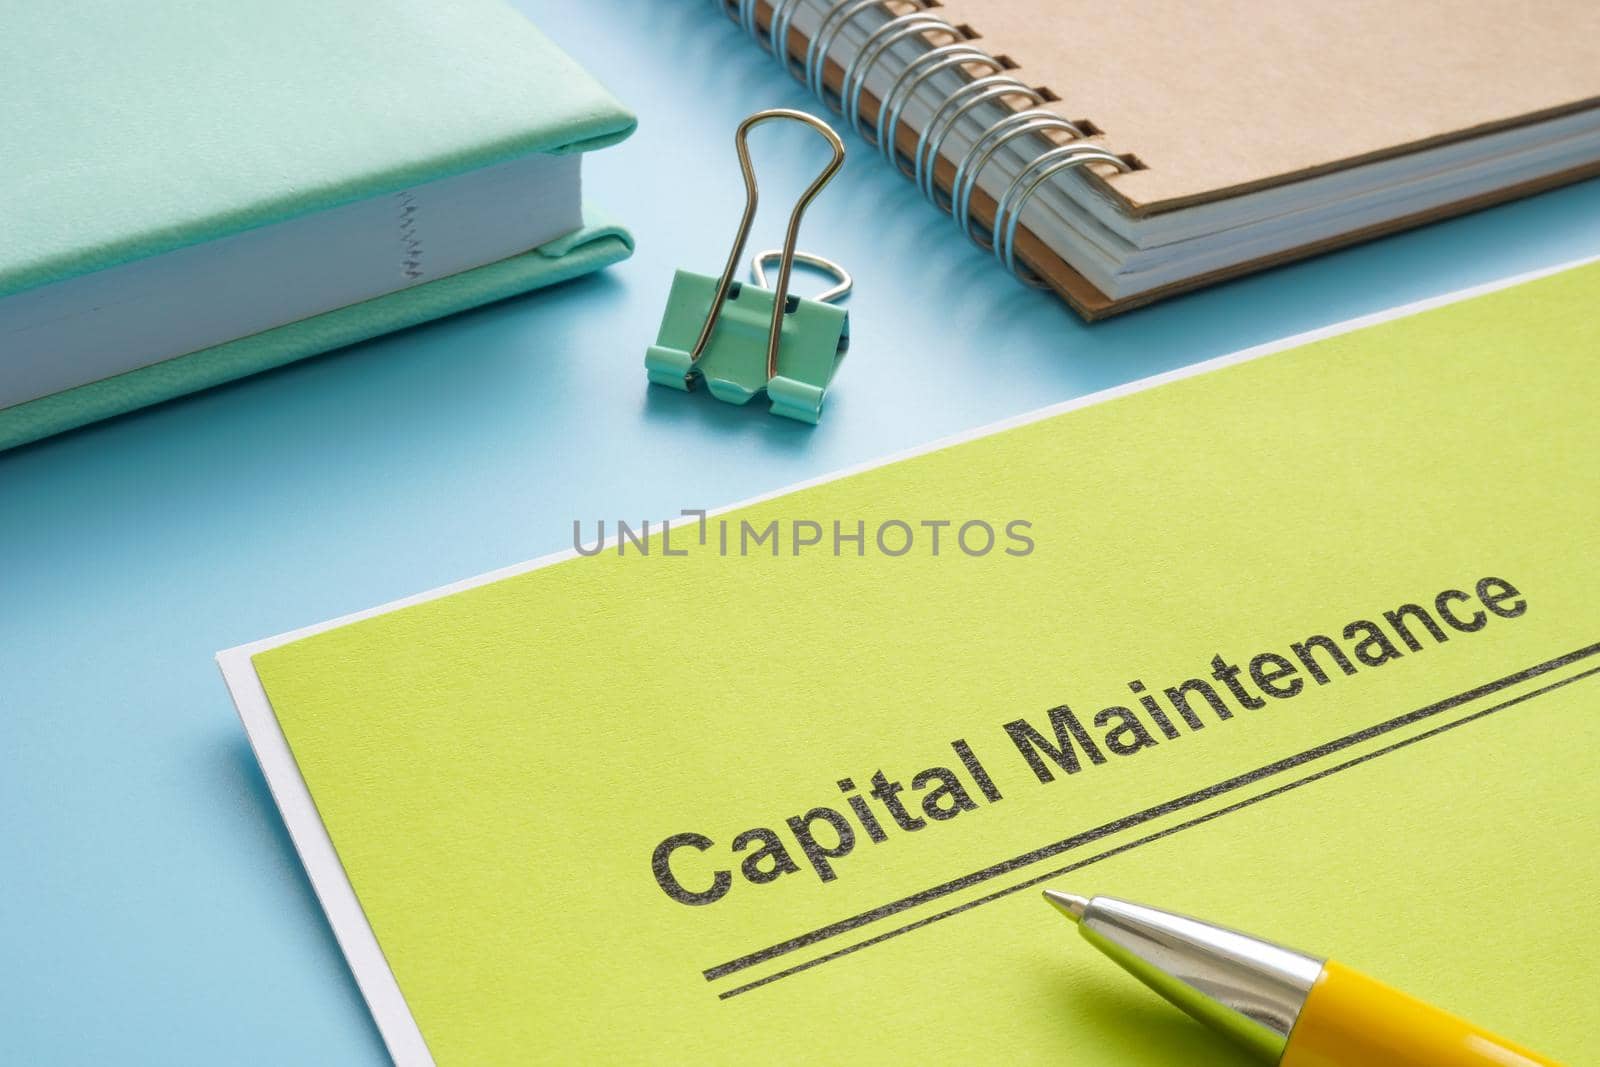 Papers about capital maintenance near the notepad. by designer491